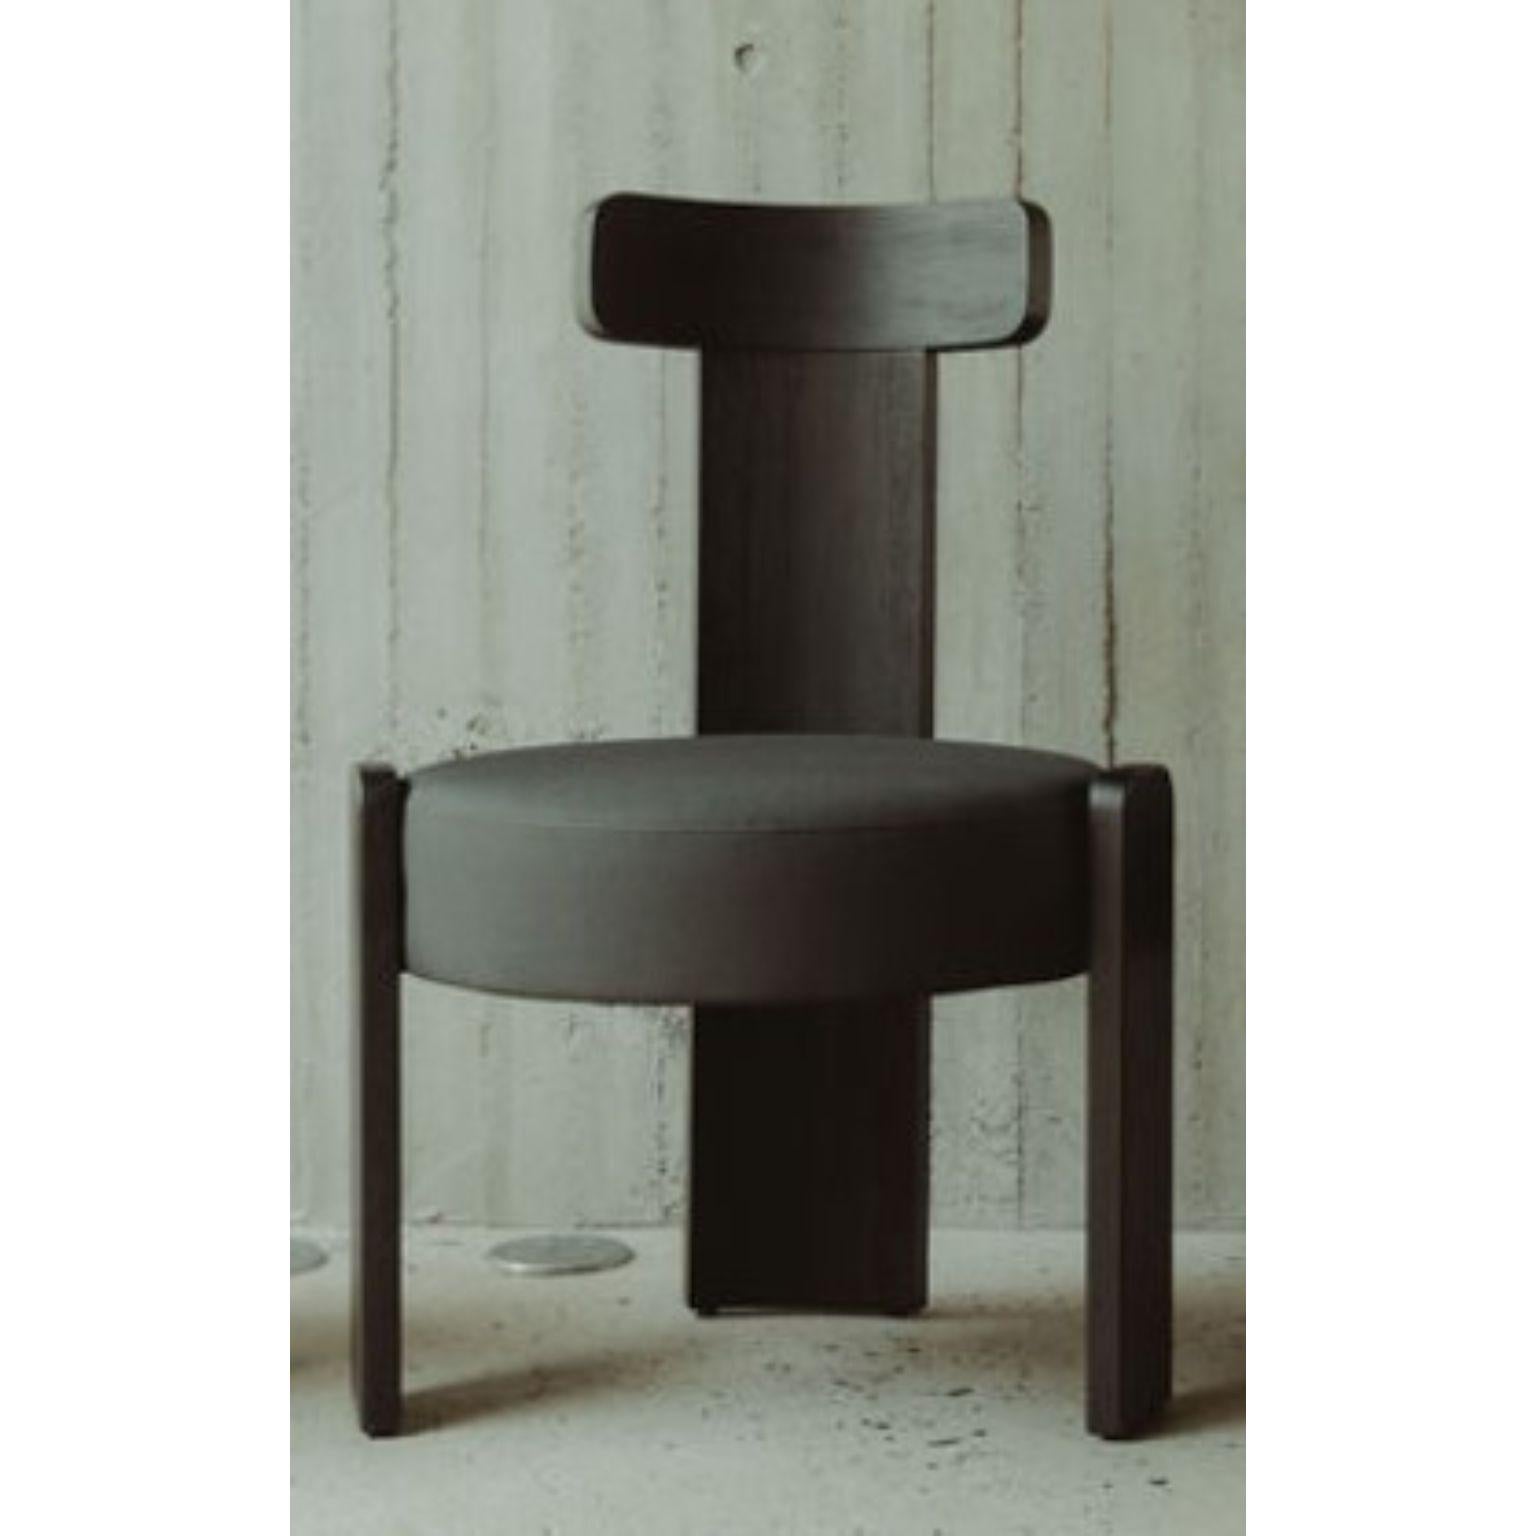 Gabo Black Solid Oak Wood Dining Chair by David Del Valle
Dimensions: D 60 x W 60 x H 90 cm.
Materials: Oak.

DAVID VALLE
We are a place, a space, a woven chair, the dreams of a craftsman, the pride of a worker, we are a way of thinking, we are